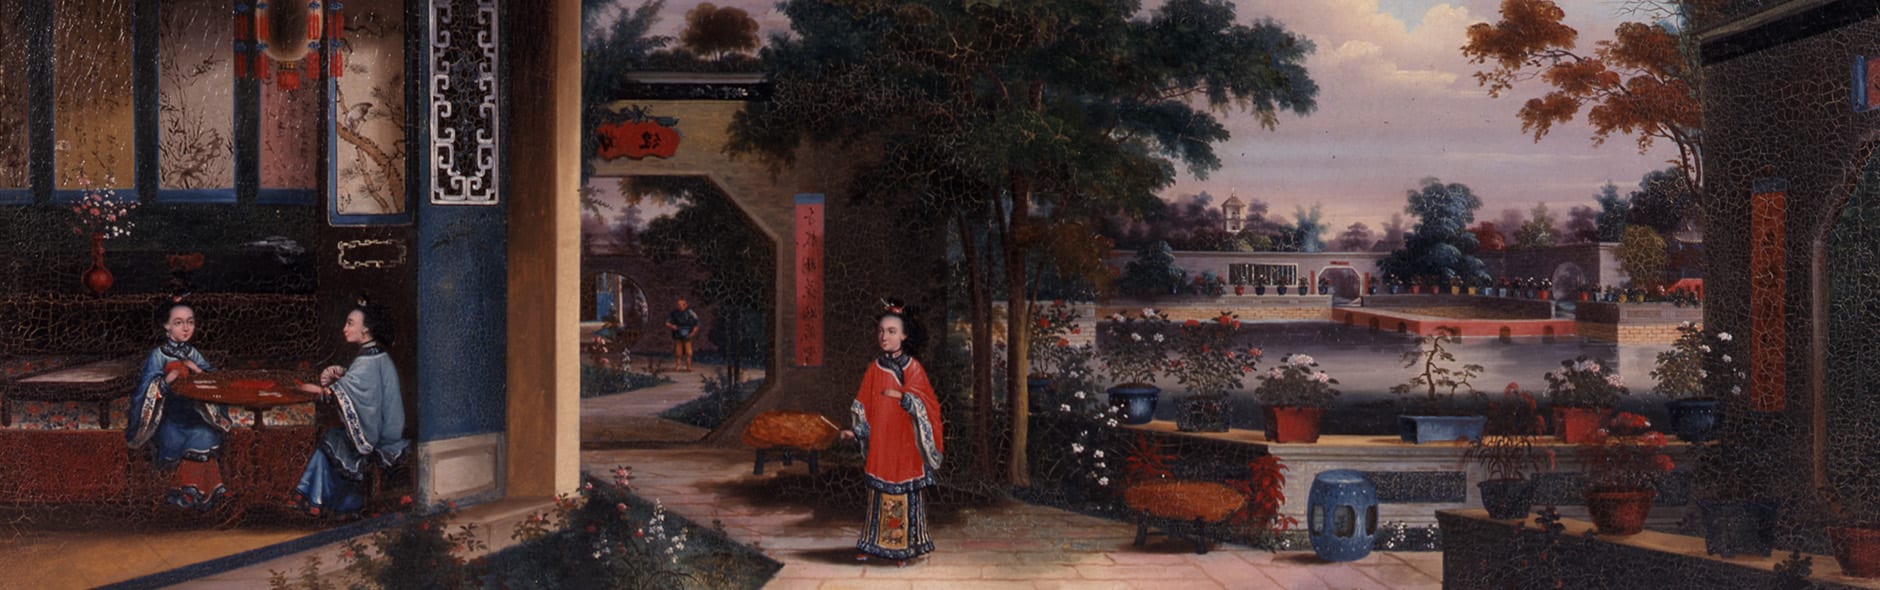 This painting of "Houqua's Garden" is by a Chinese artist. It shows a Chinese landscape with a tile walk around the wall of an angular pool. Potted plants are on top of the wall and flower beds, trees, and benches beautify the walk. On the left is an octagonal portal with a Chinese inscription. A female figure in red Chinese garb is in the center holding a fan. Behind her is an octagonal gate and a figure watering beds. On the right is an open tearoom, with screen and scrolls and two figures inside in blue Chinese garb, sitting at a table and playing a game. The painting is in its original Chinese Chippendale frame.